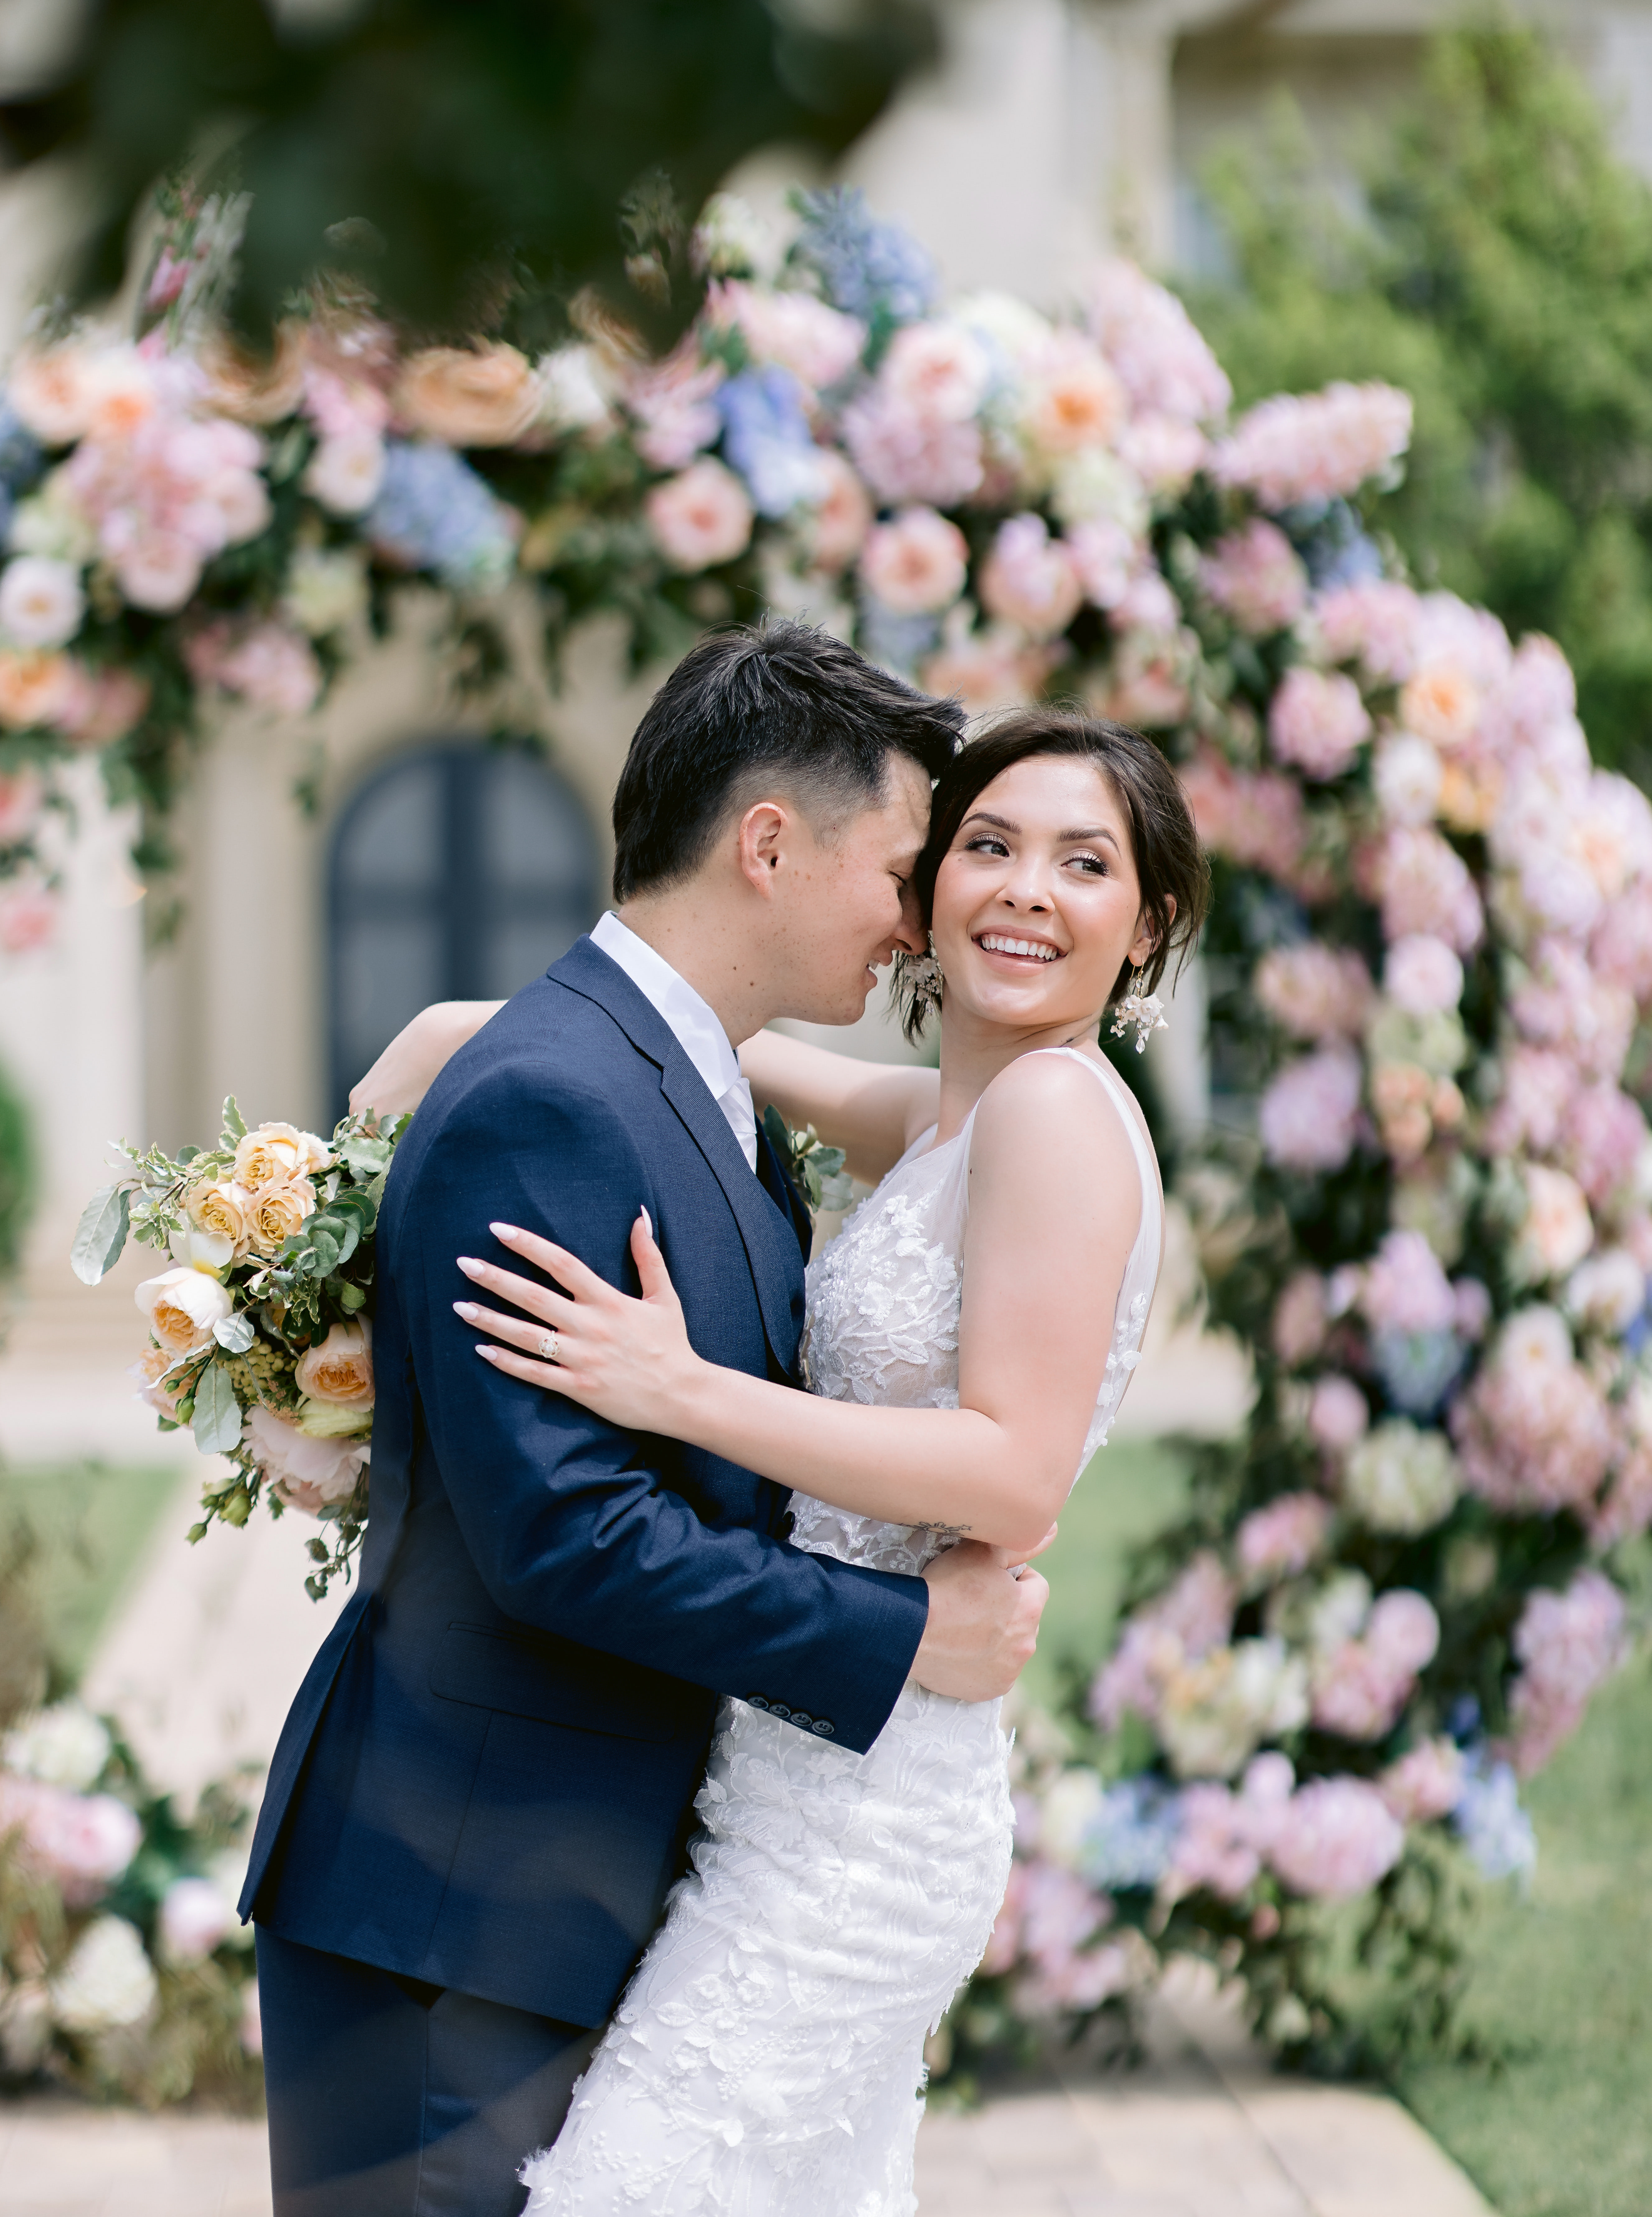 Bride smiles and looks off to the side while groom hugs her in front of the flower arch, captured by Tatyana Zadorin Photography